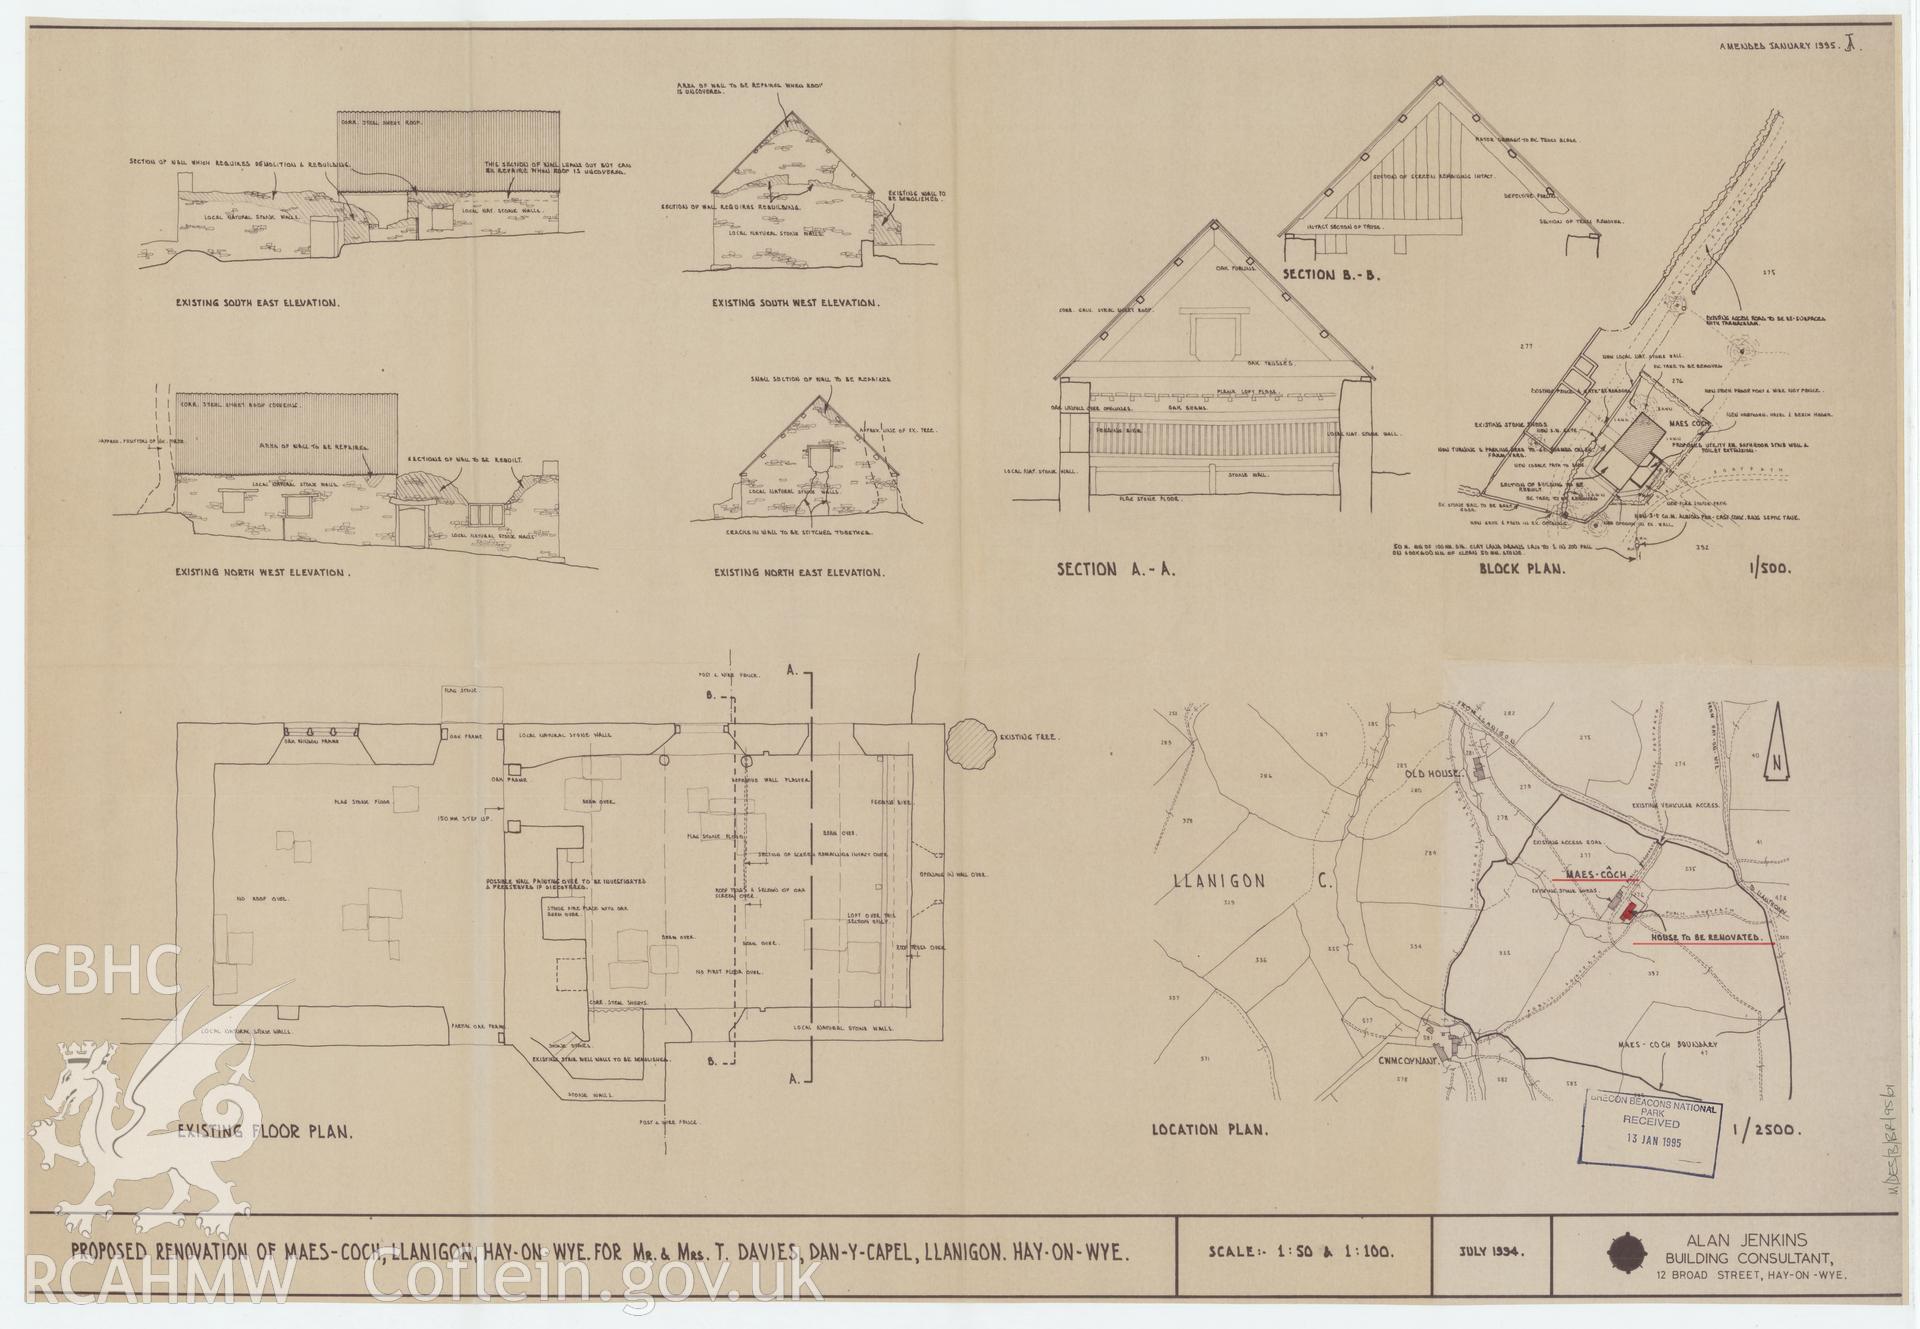 Digital copy of a measured survey comprising plan, elevation and map of Maes Coch House produced by Alan Jenkins Building Consultant ref.M/DES/B/BR/95/01.